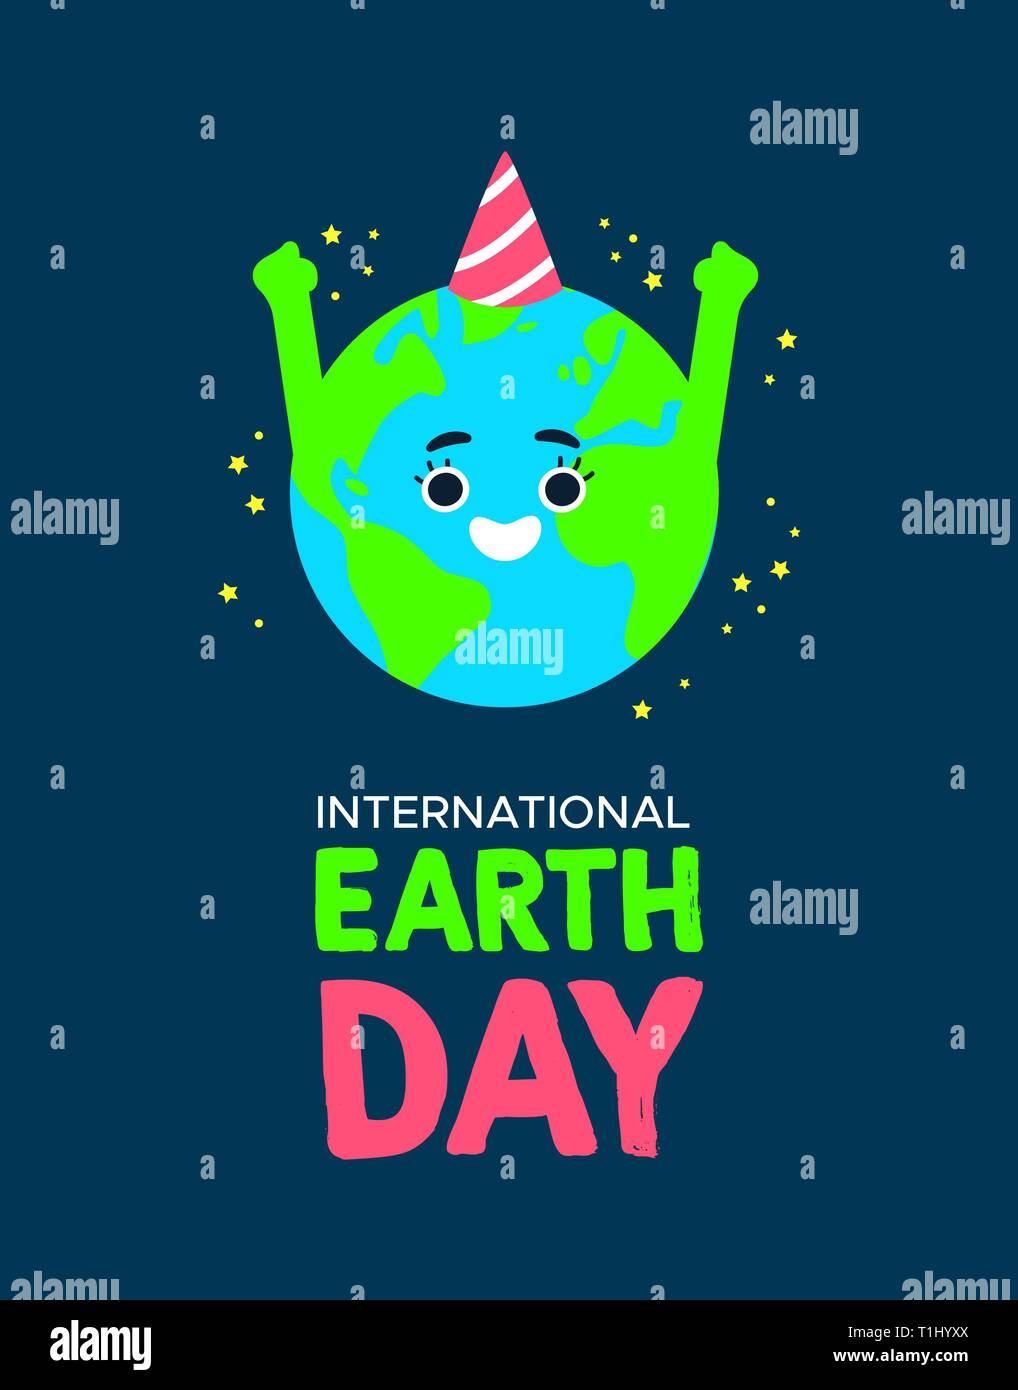 International Earth Day illustration of happy planet with birthday hat. World environment celebration concept. Stock Vector